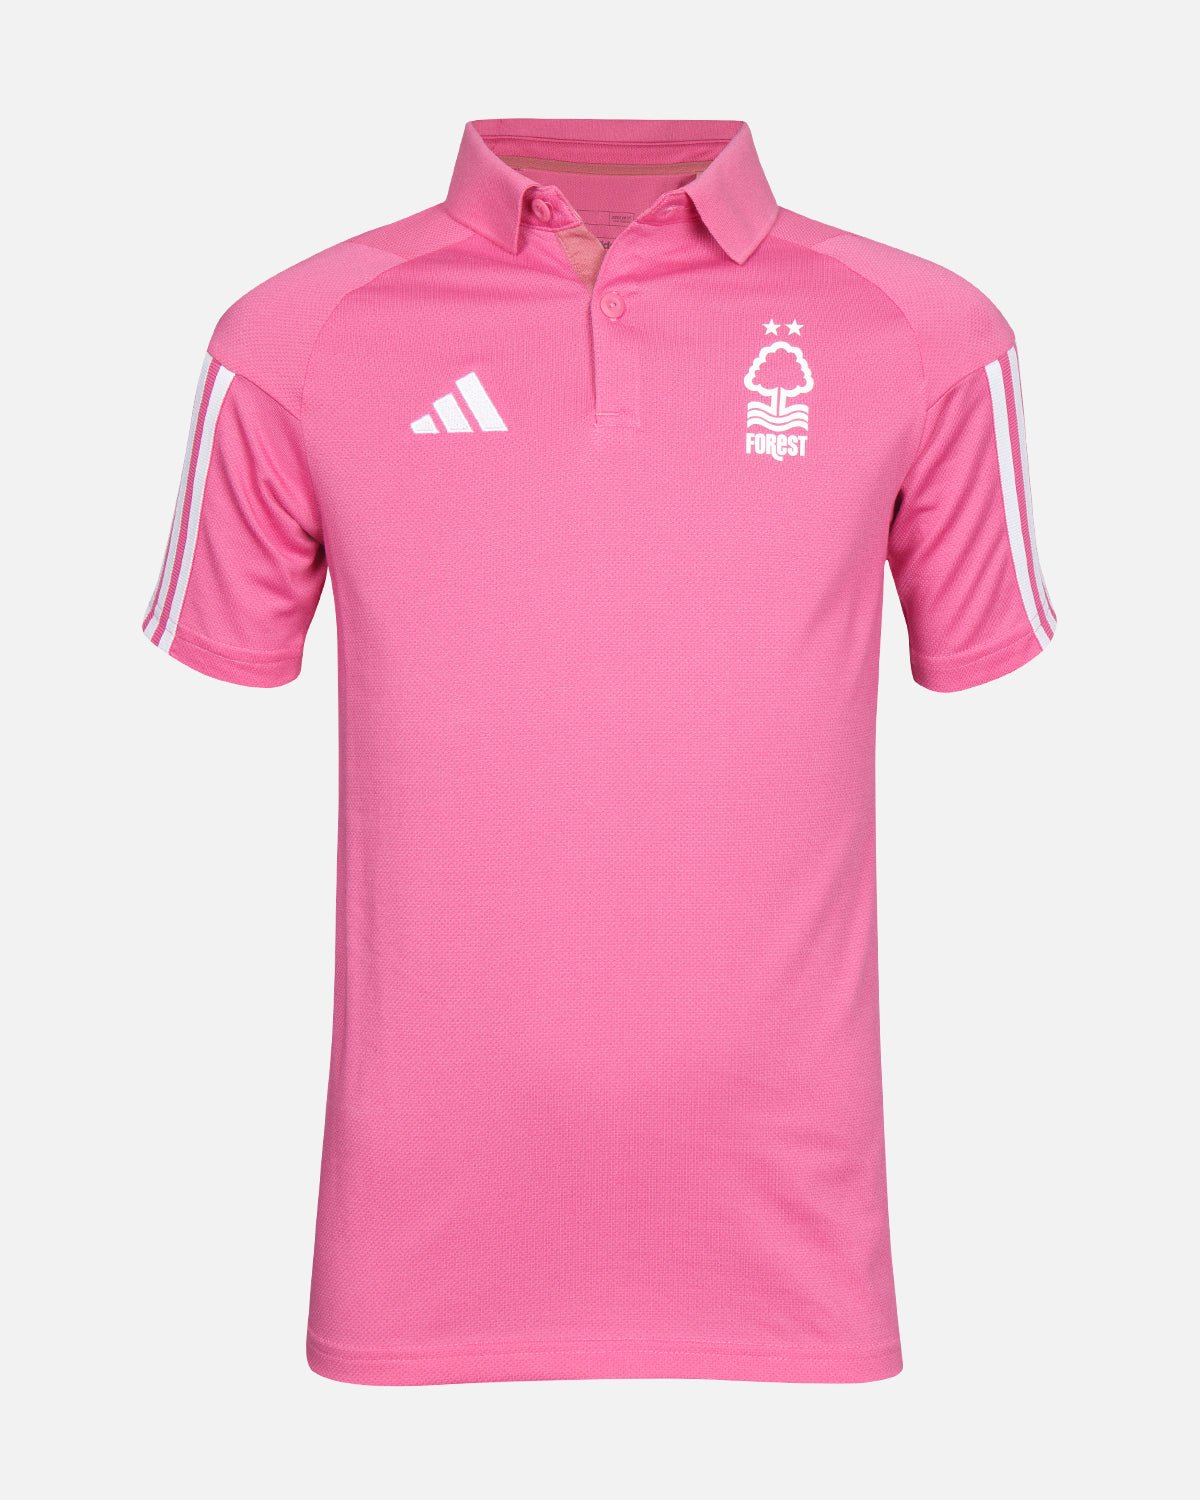 NFFC Junior Pink Warm Up Polo 23-24 - Nottingham Forest FC